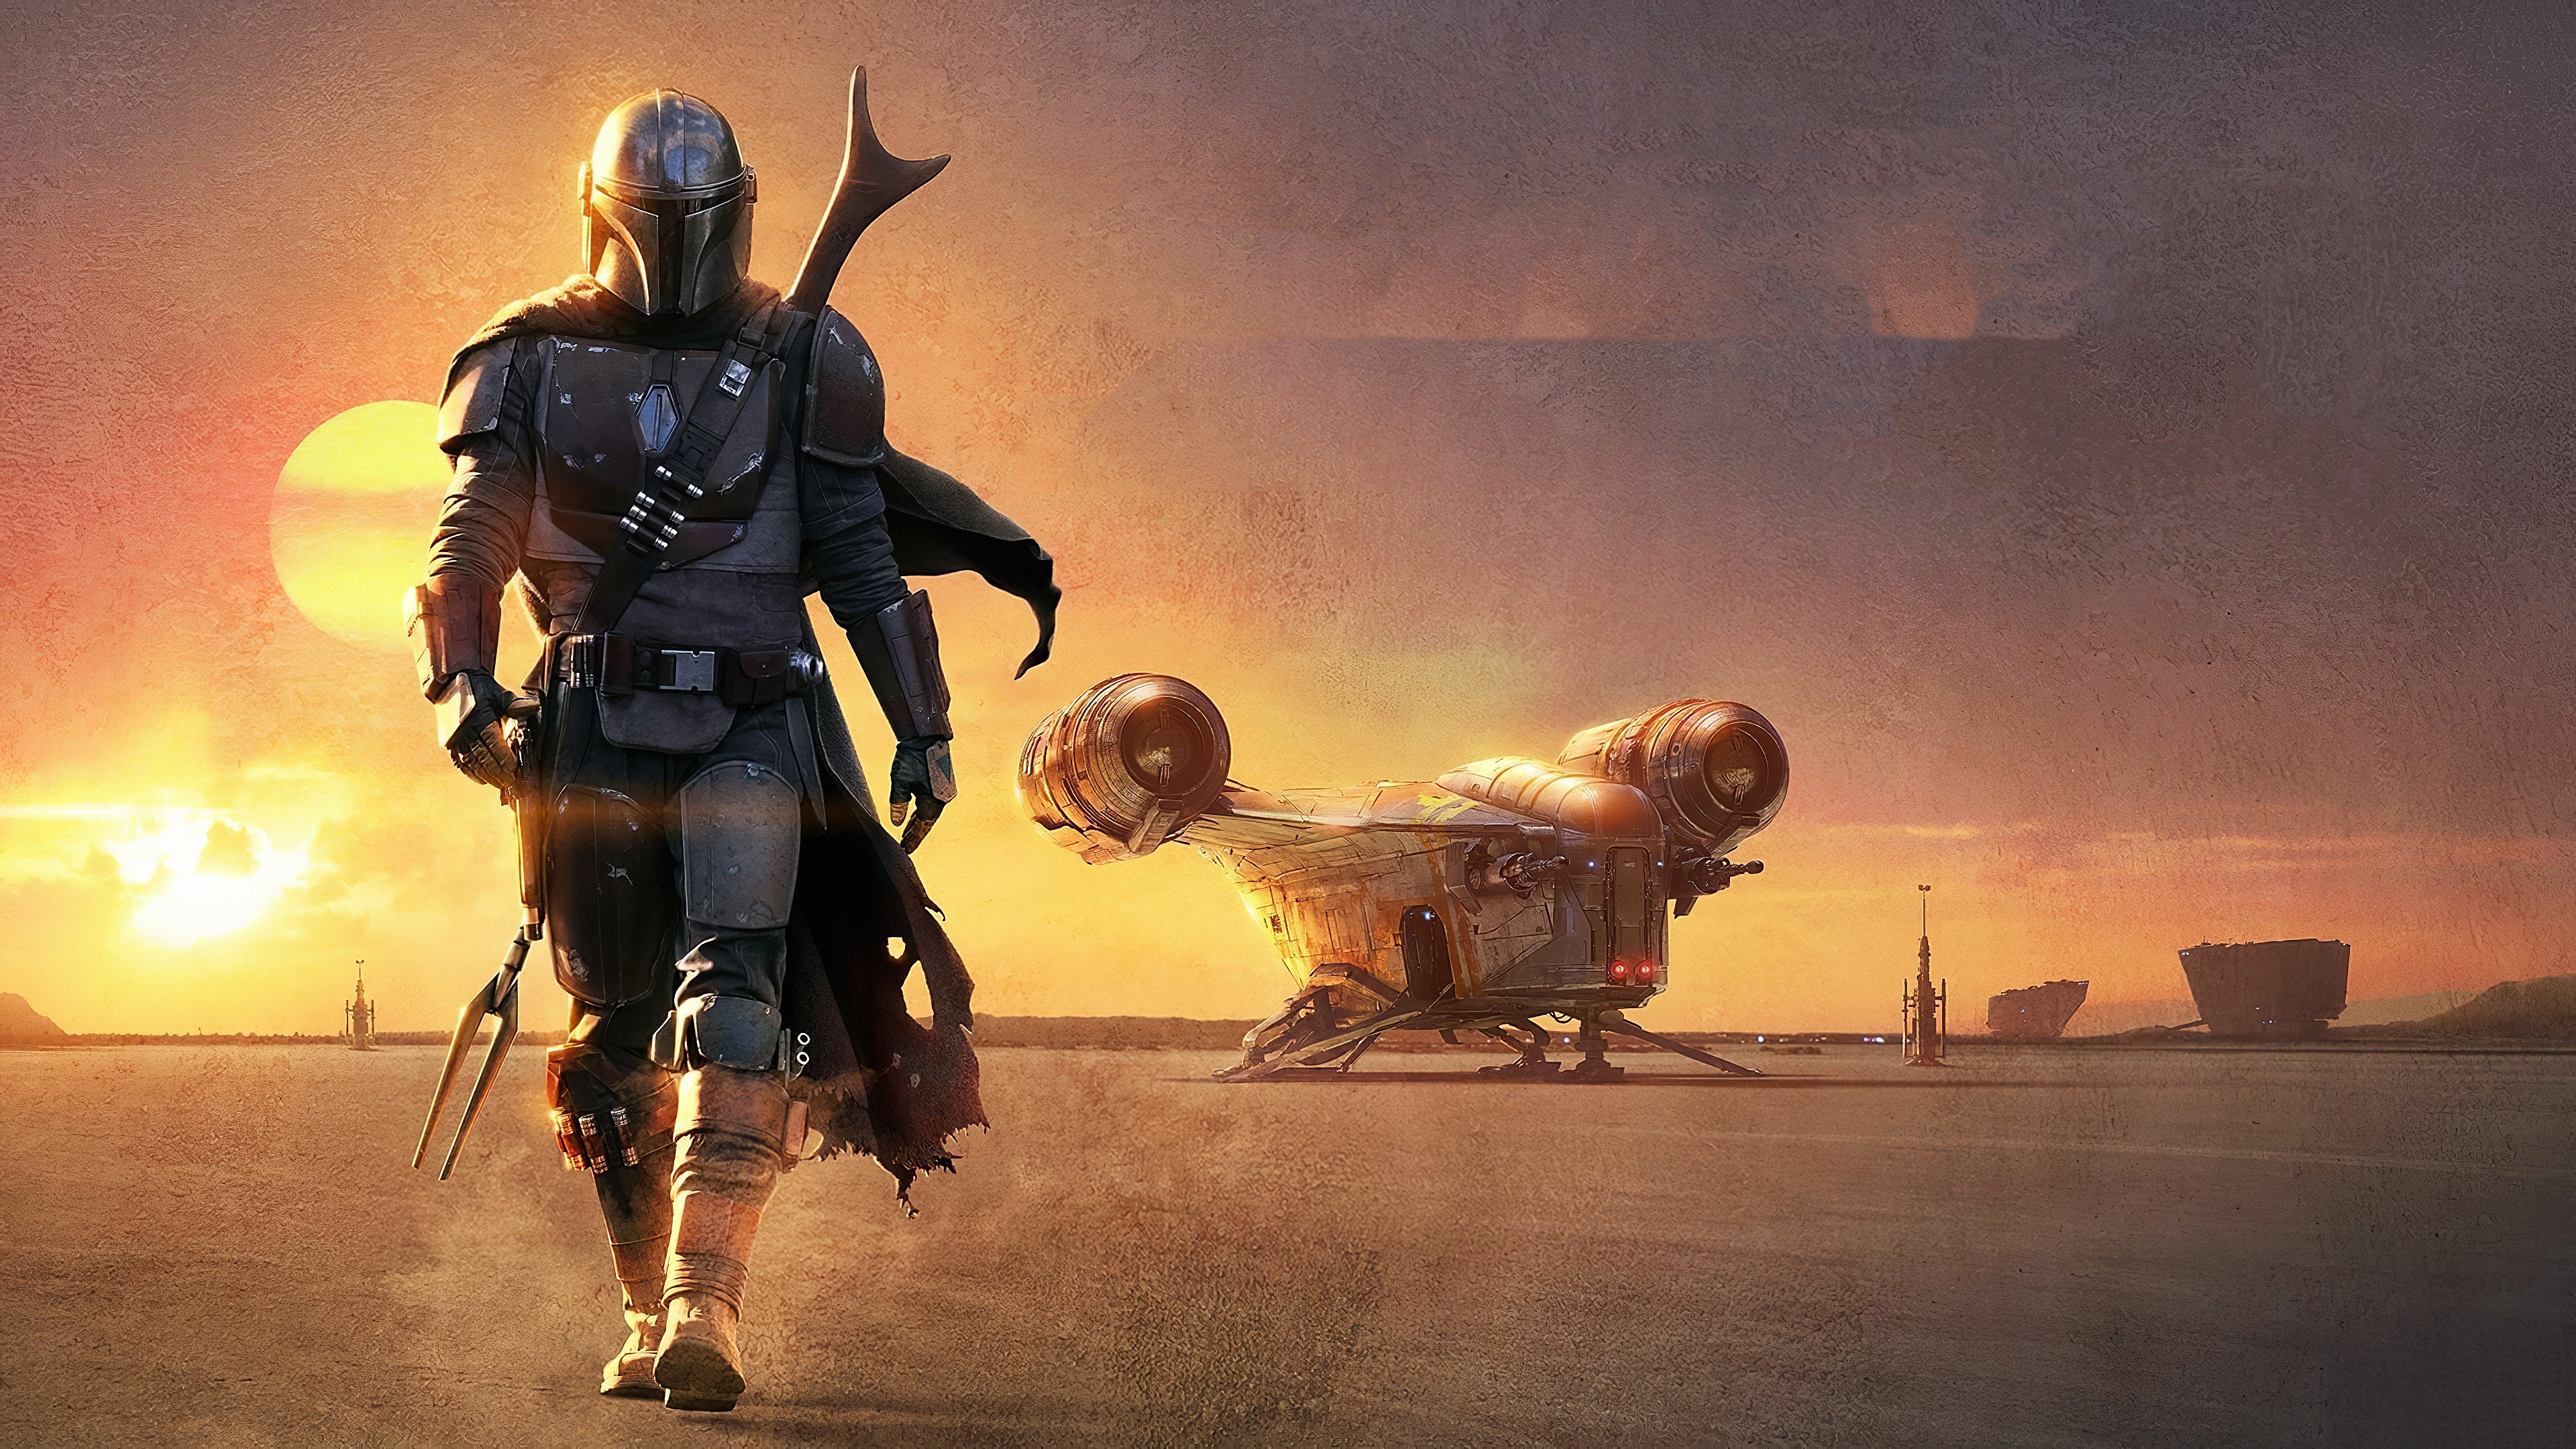 220+ The Mandalorian HD Wallpapers and Backgrounds